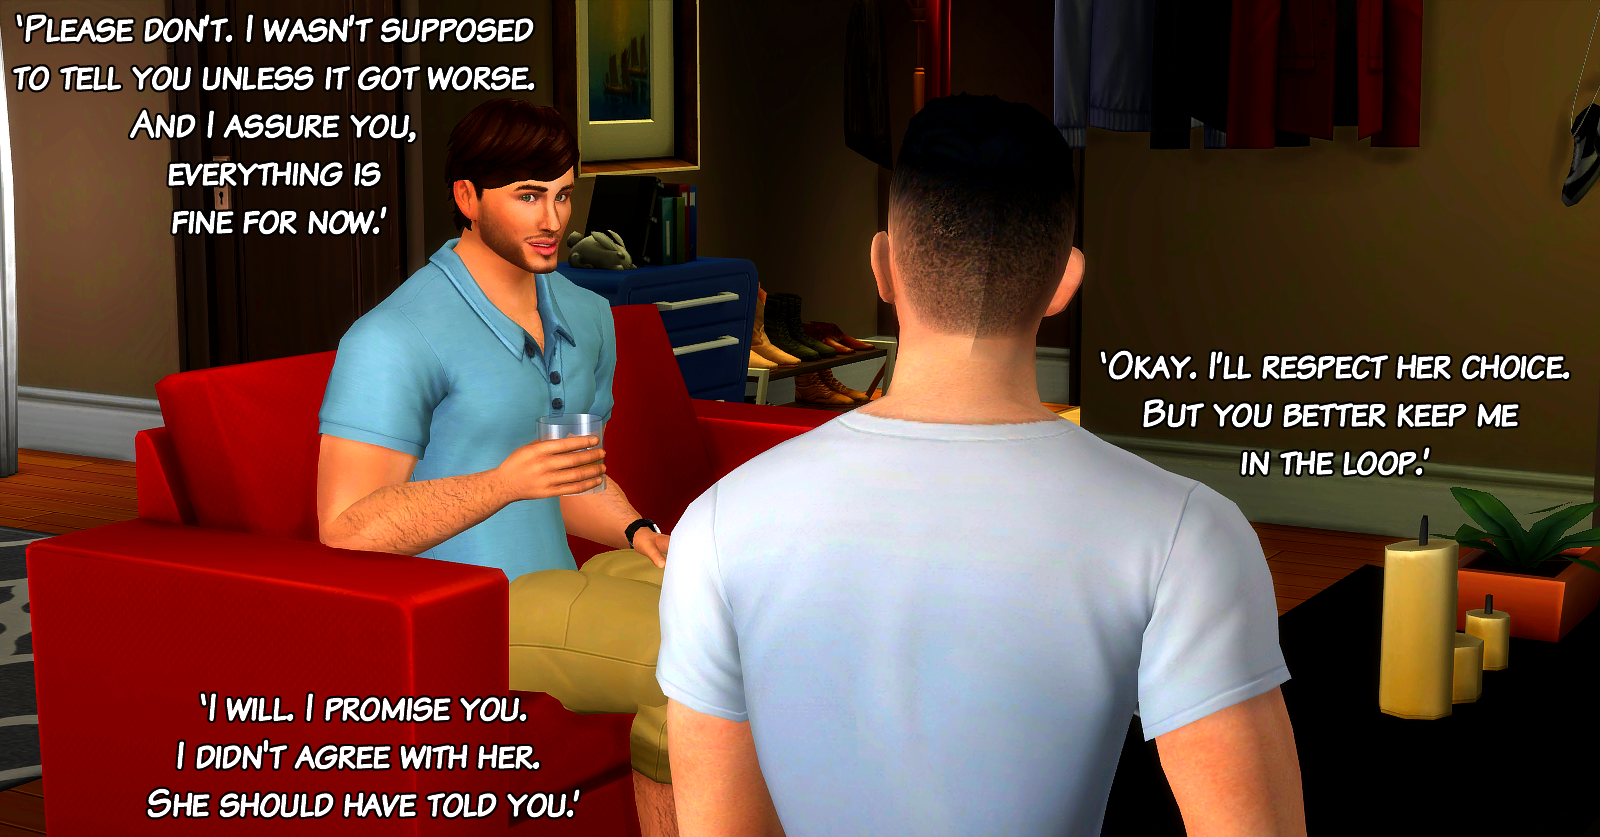 [Untitled] 24 hours before... - Gay Stories 4 Sims - LoversLab